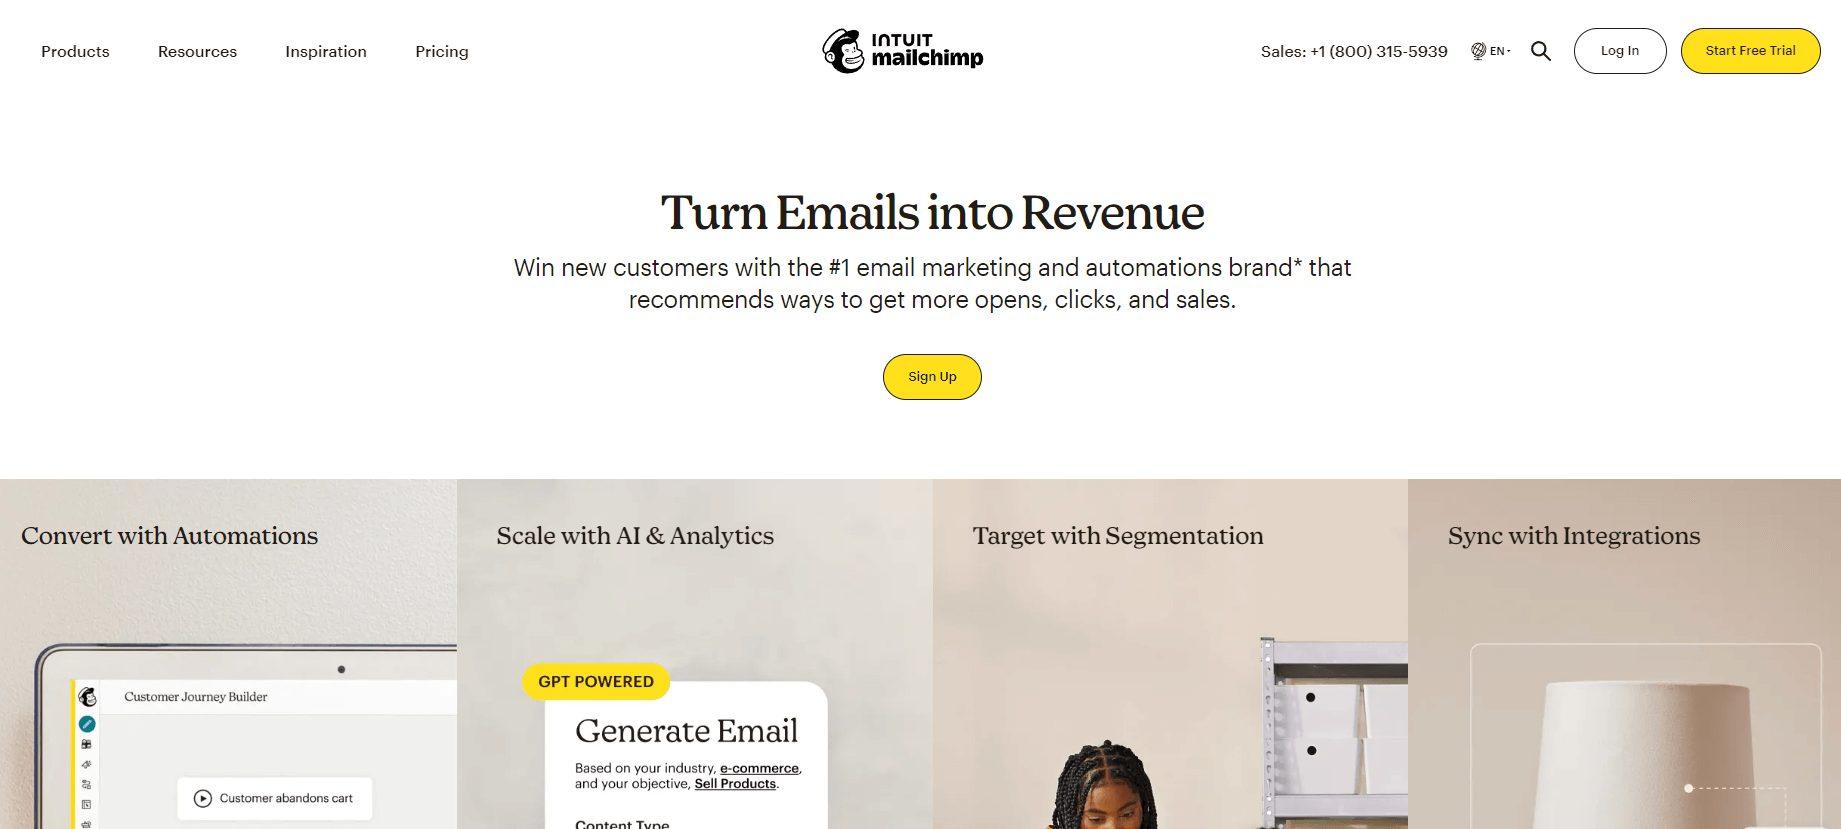 Mailchimp homepage highlighting the motto Turn emails into revenue